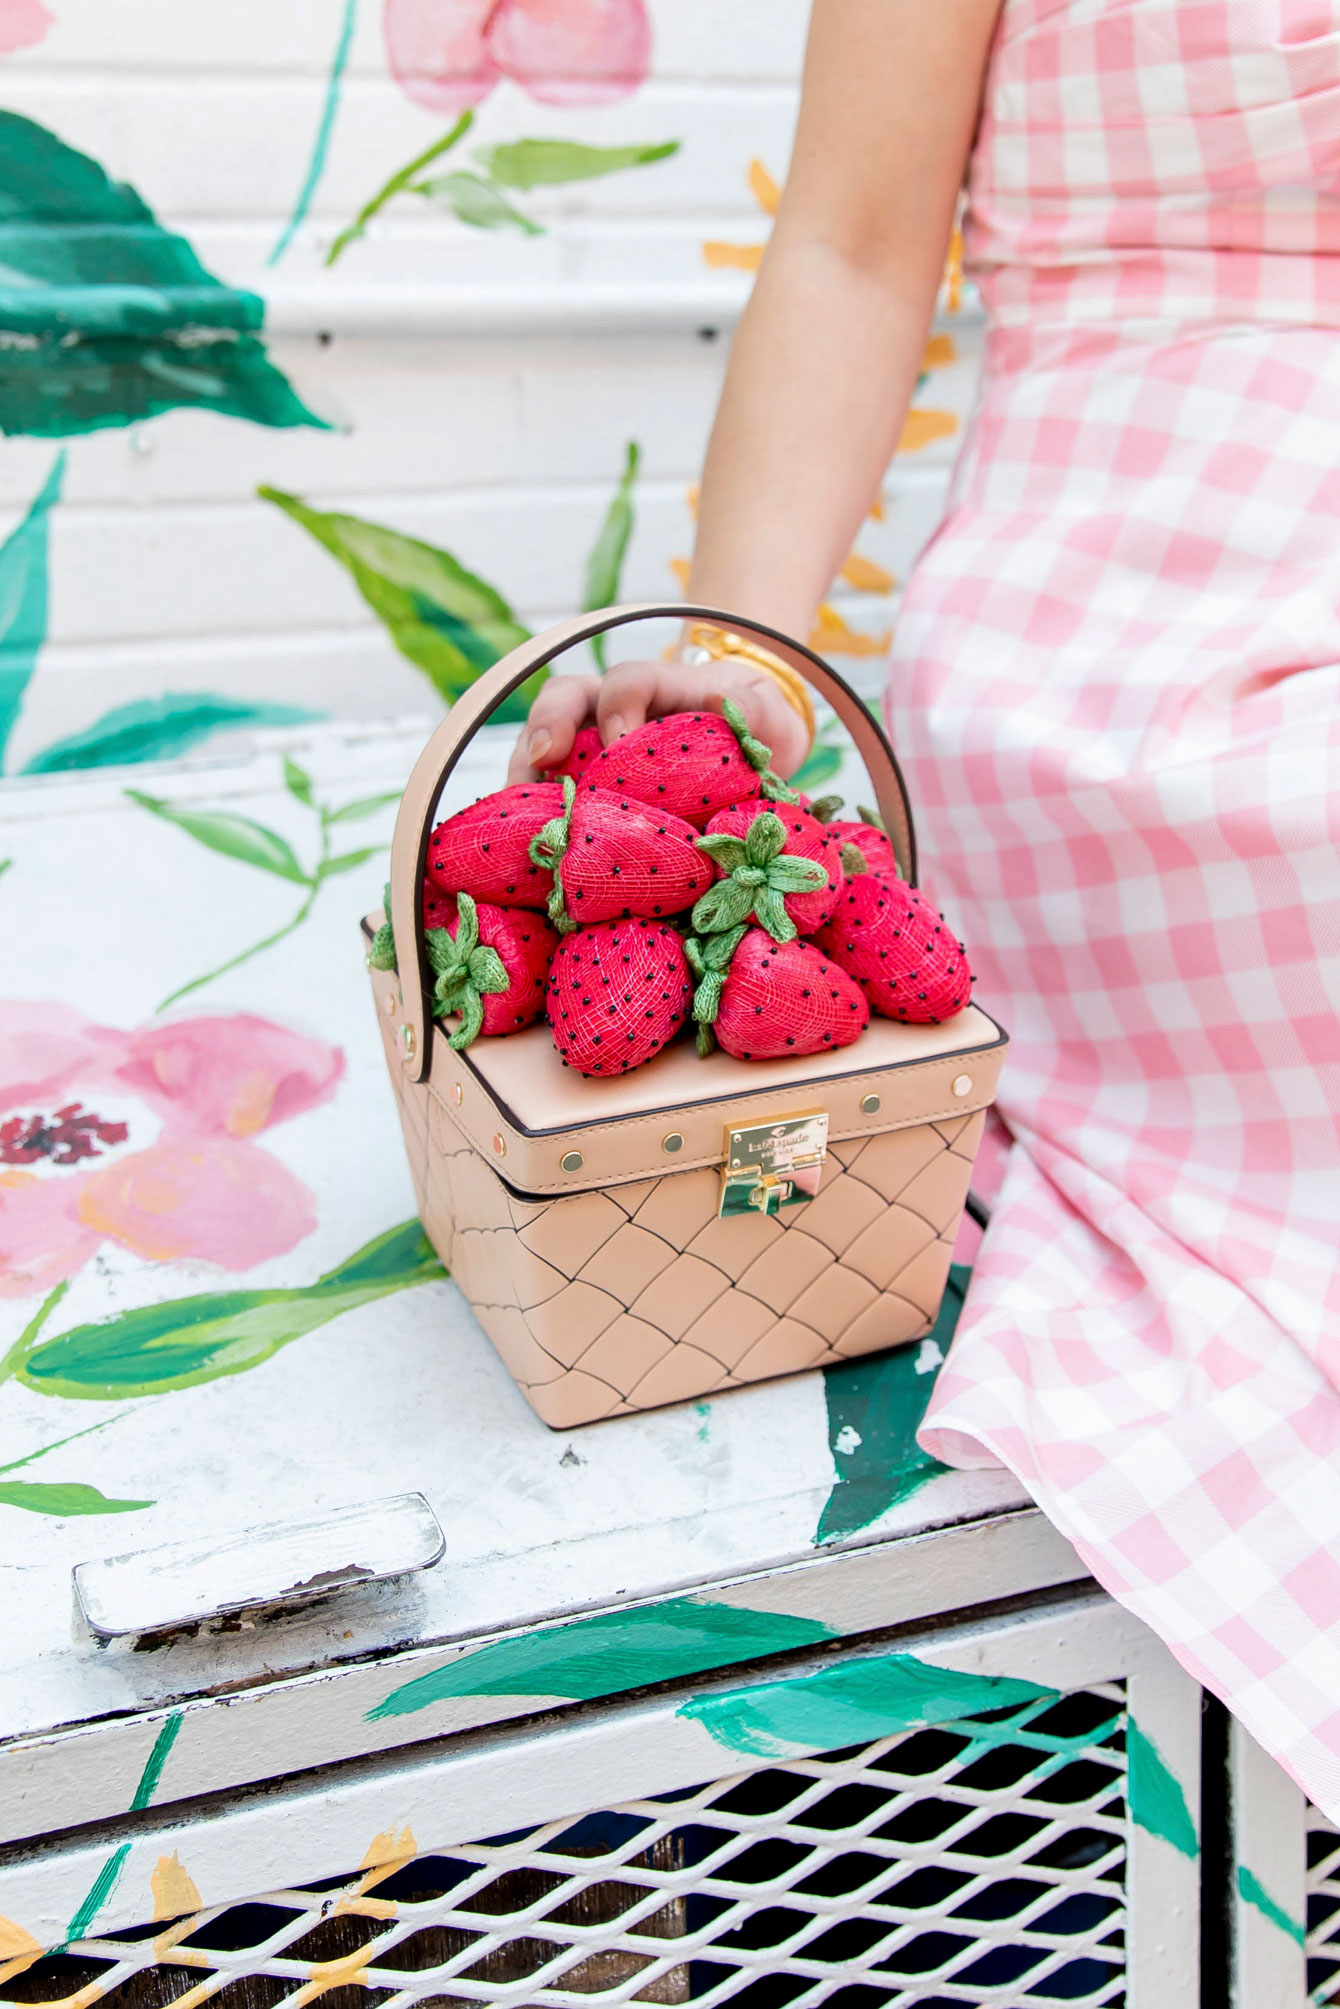 Kate Spade Has A Flower Bag That's As Quirky As It Gets